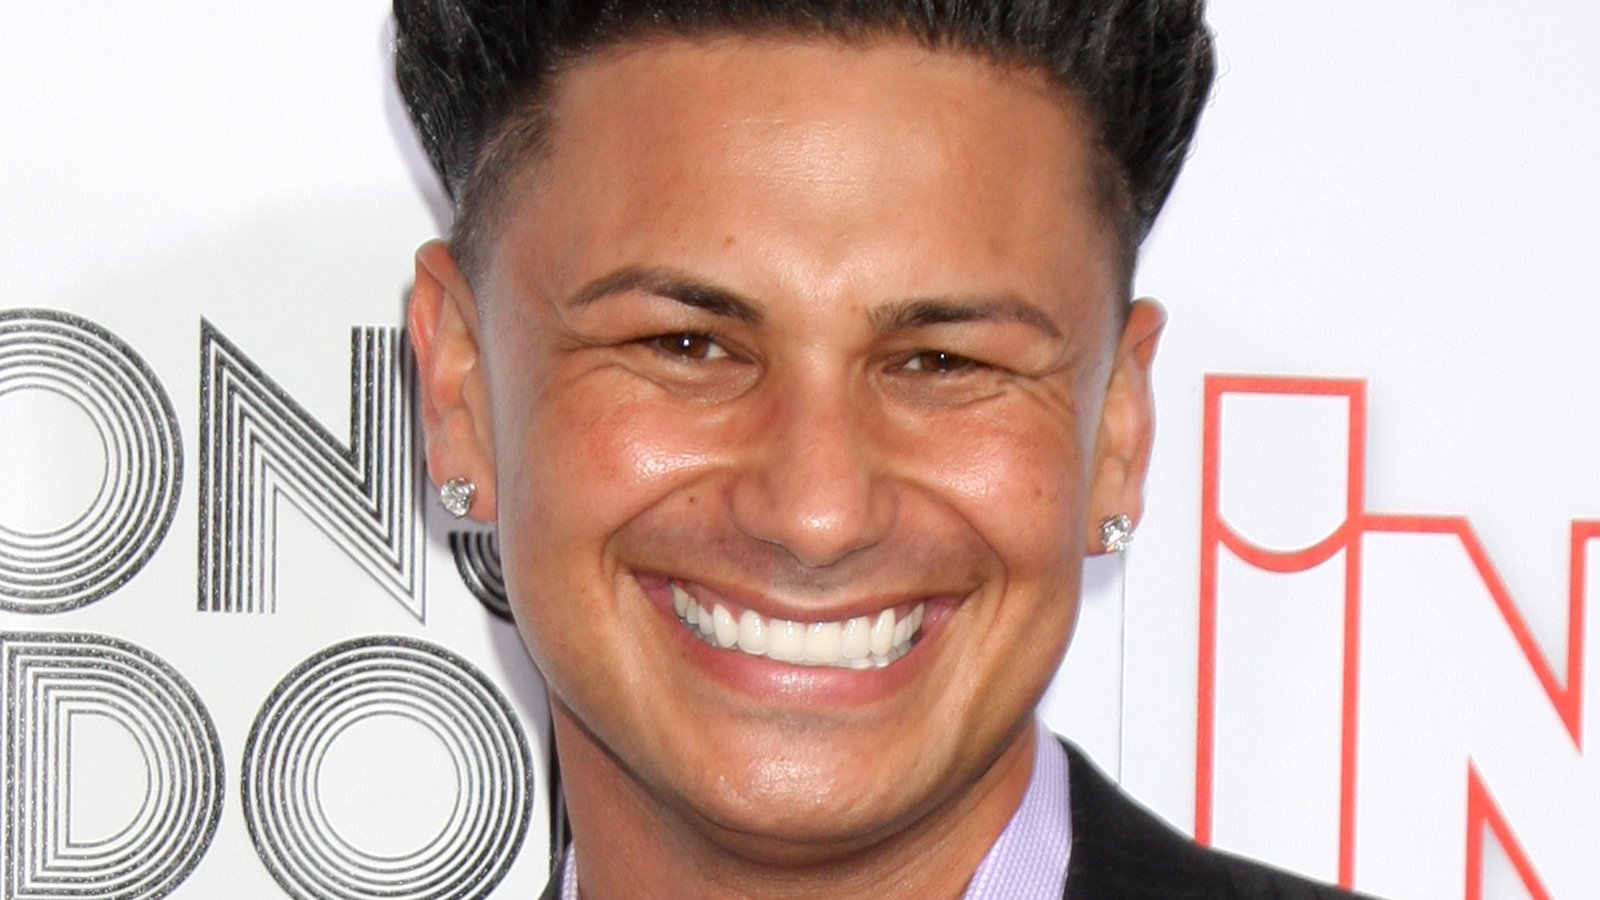 Pauly D's Net Worth: How Much Is The Jersey Shore Star Really Worth?